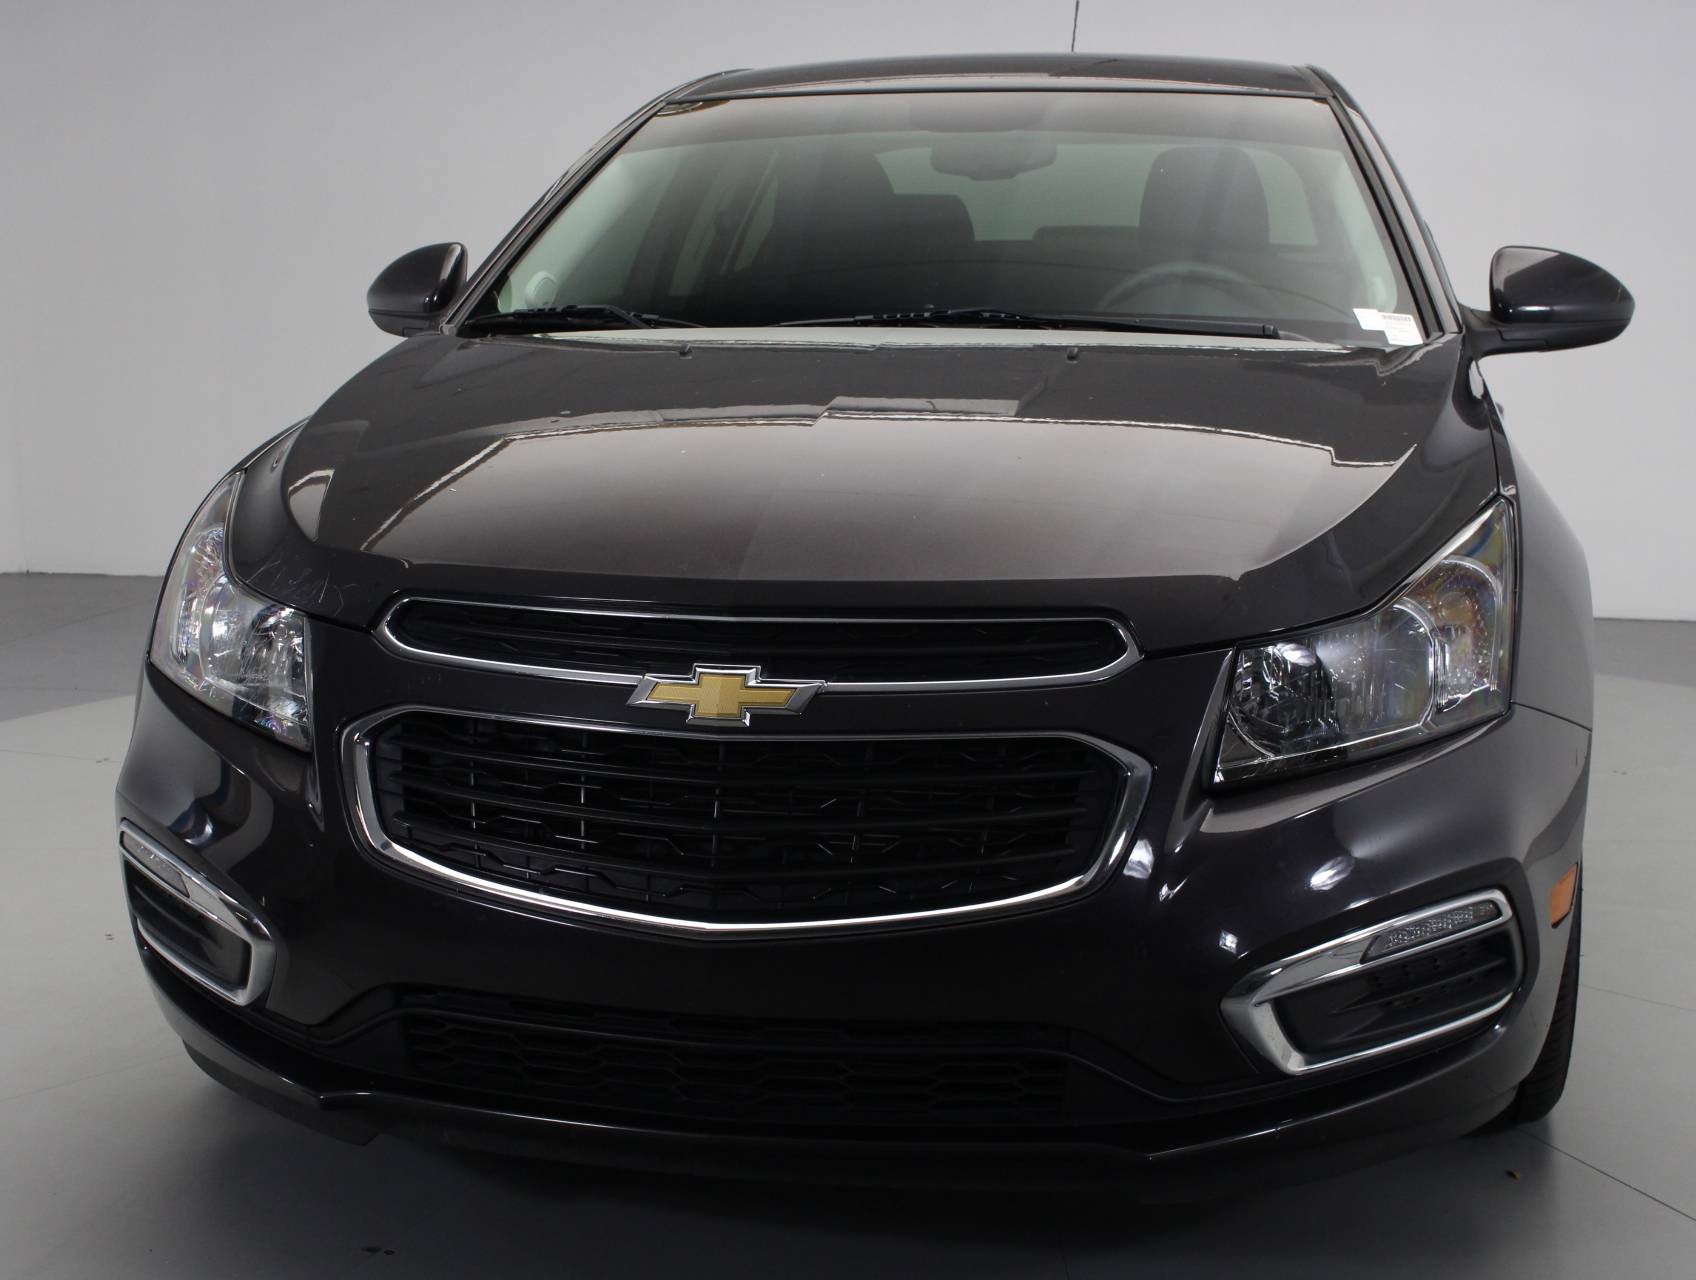 Florida Fine Cars - Used CHEVROLET CRUZE LIMITED 2016 WEST PALM 1LT